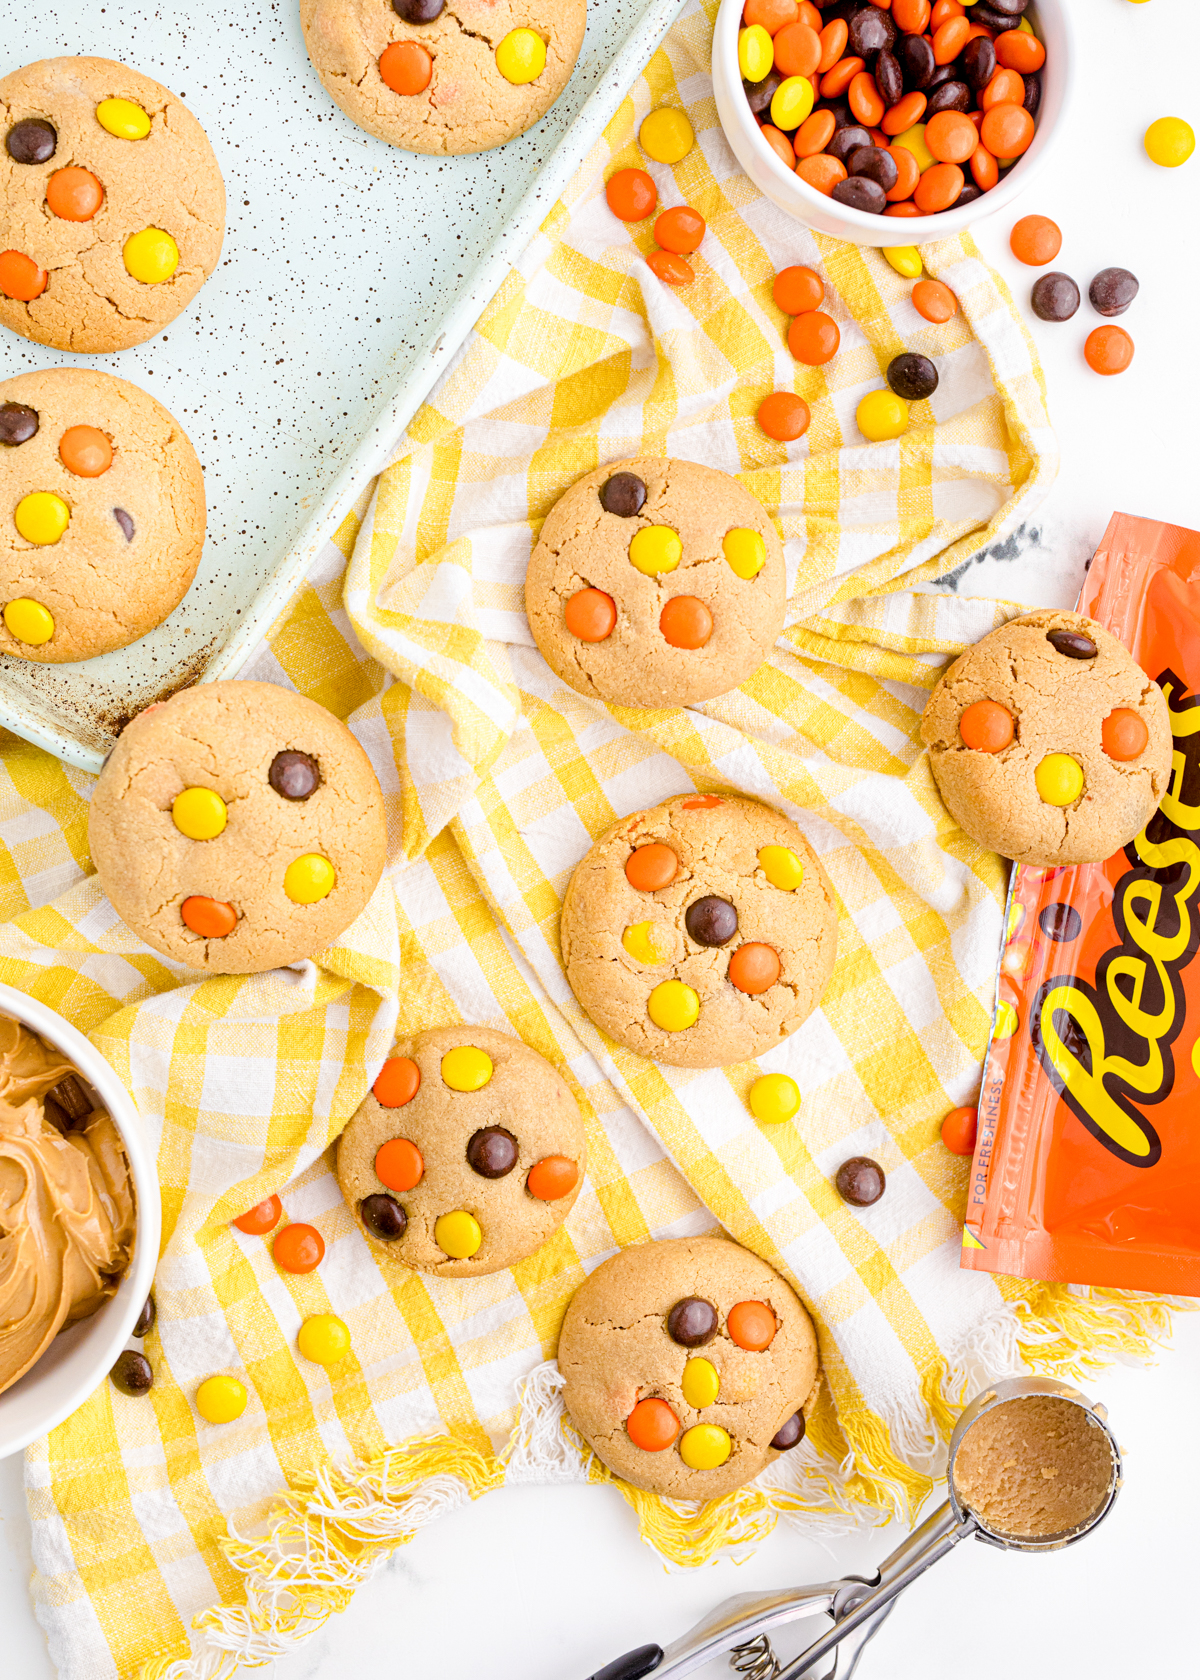 top down view of a bunch of Reees's pieces cookies